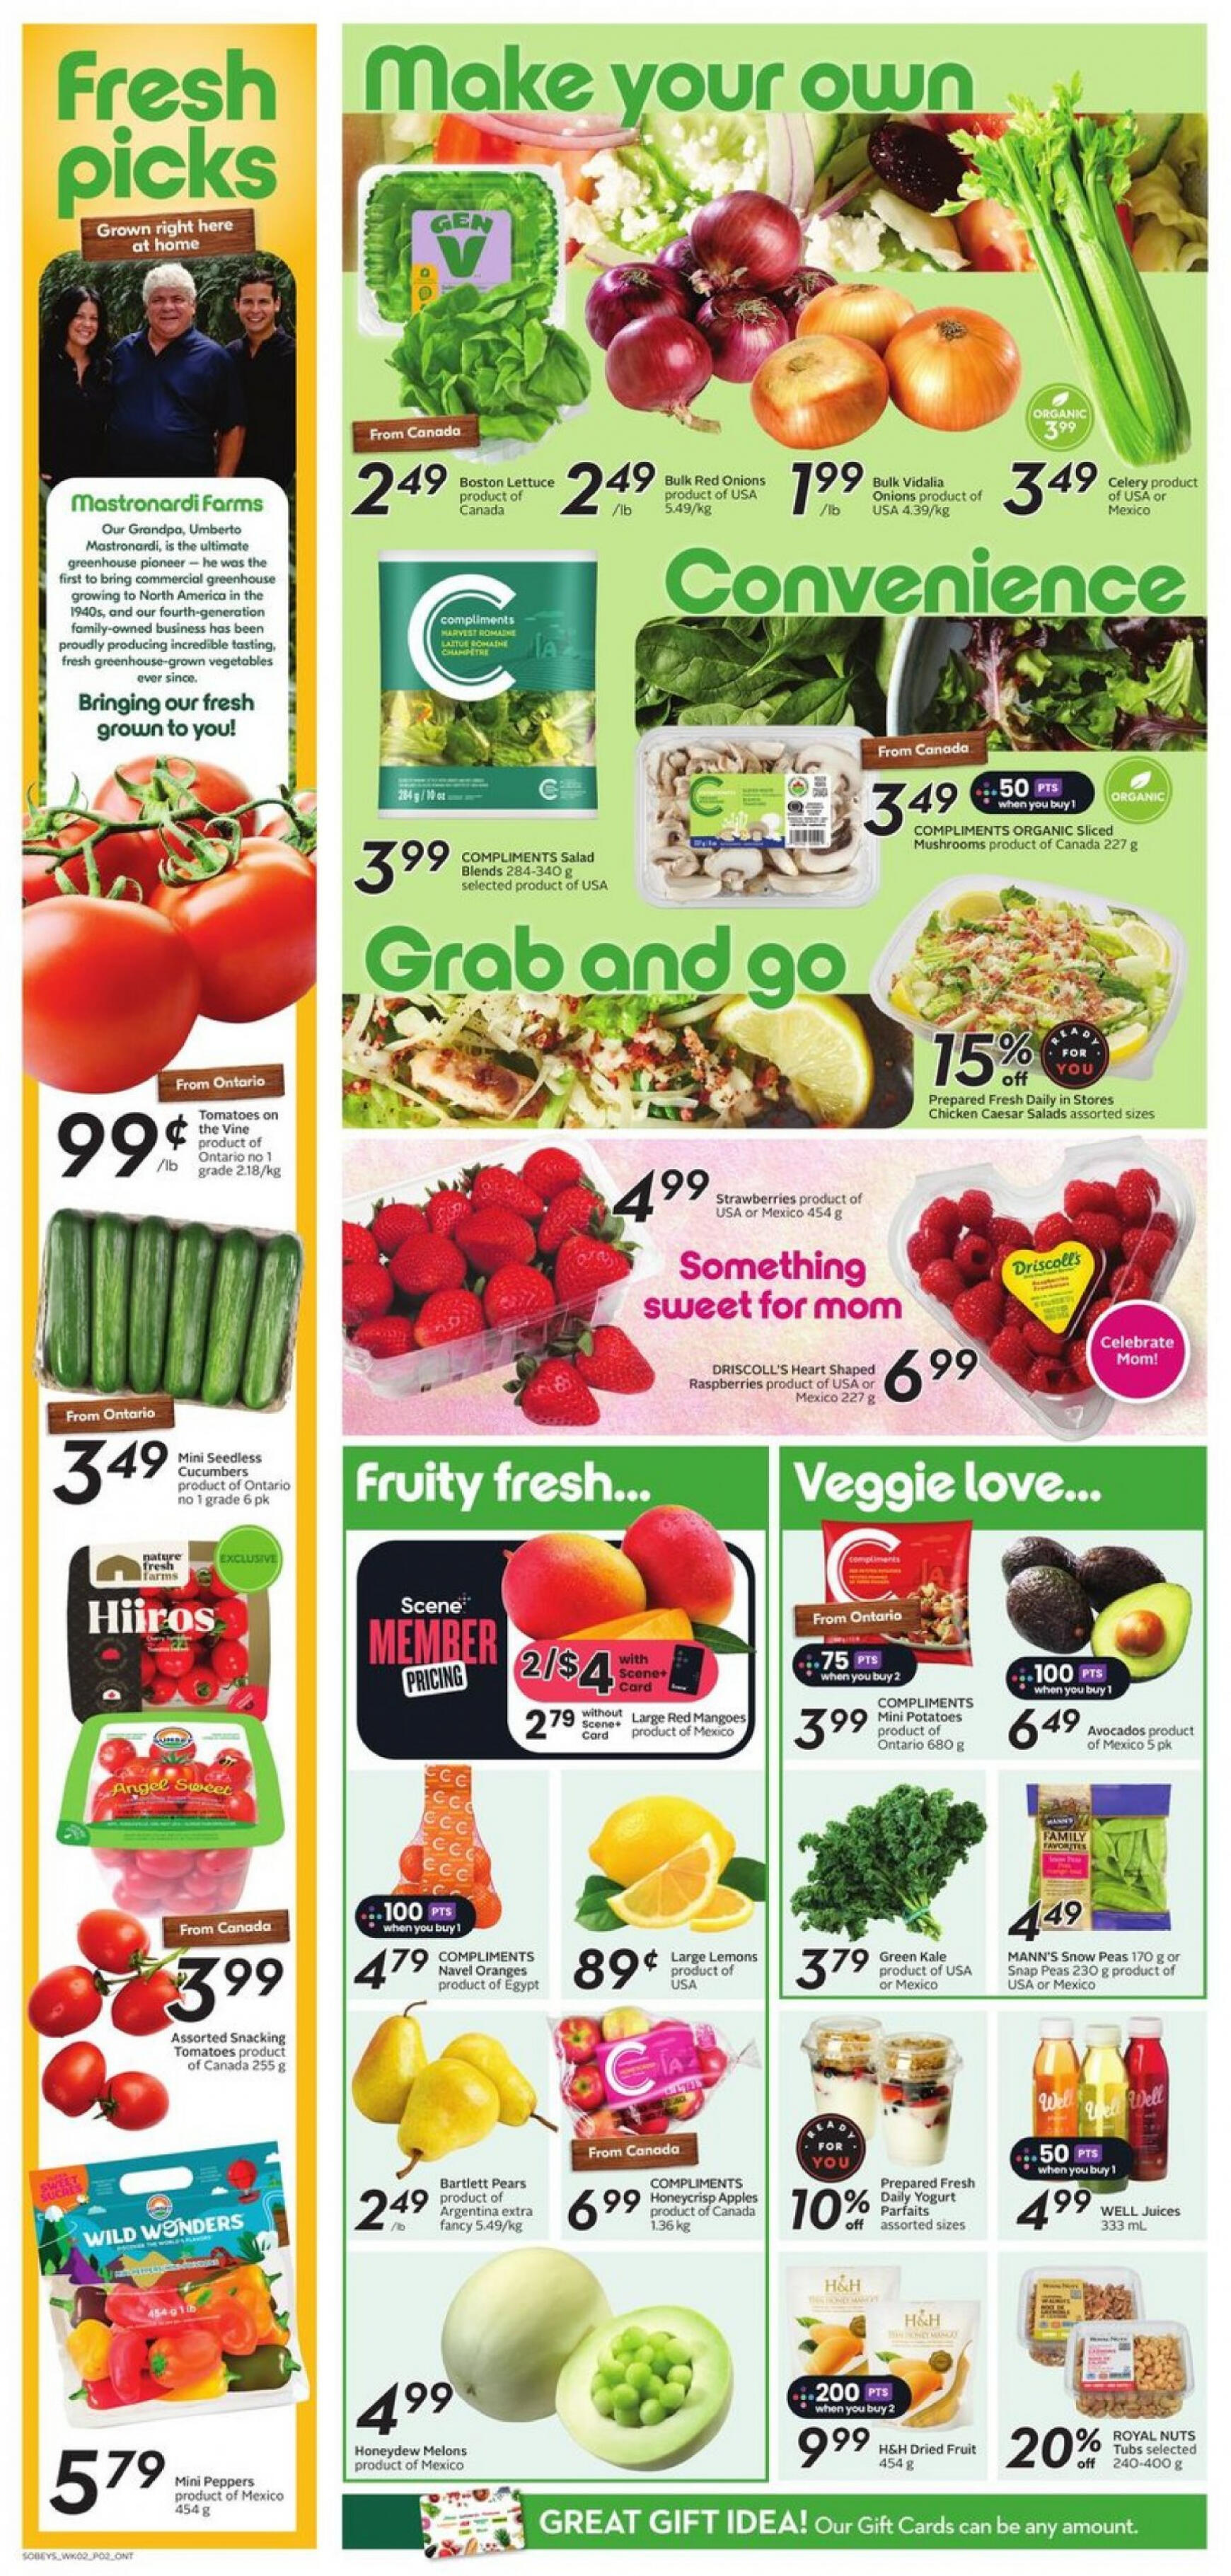 sobeys - Sobeys - Weekly Flyer - Ontario flyer current 09.05. - 15.05. - page: 6